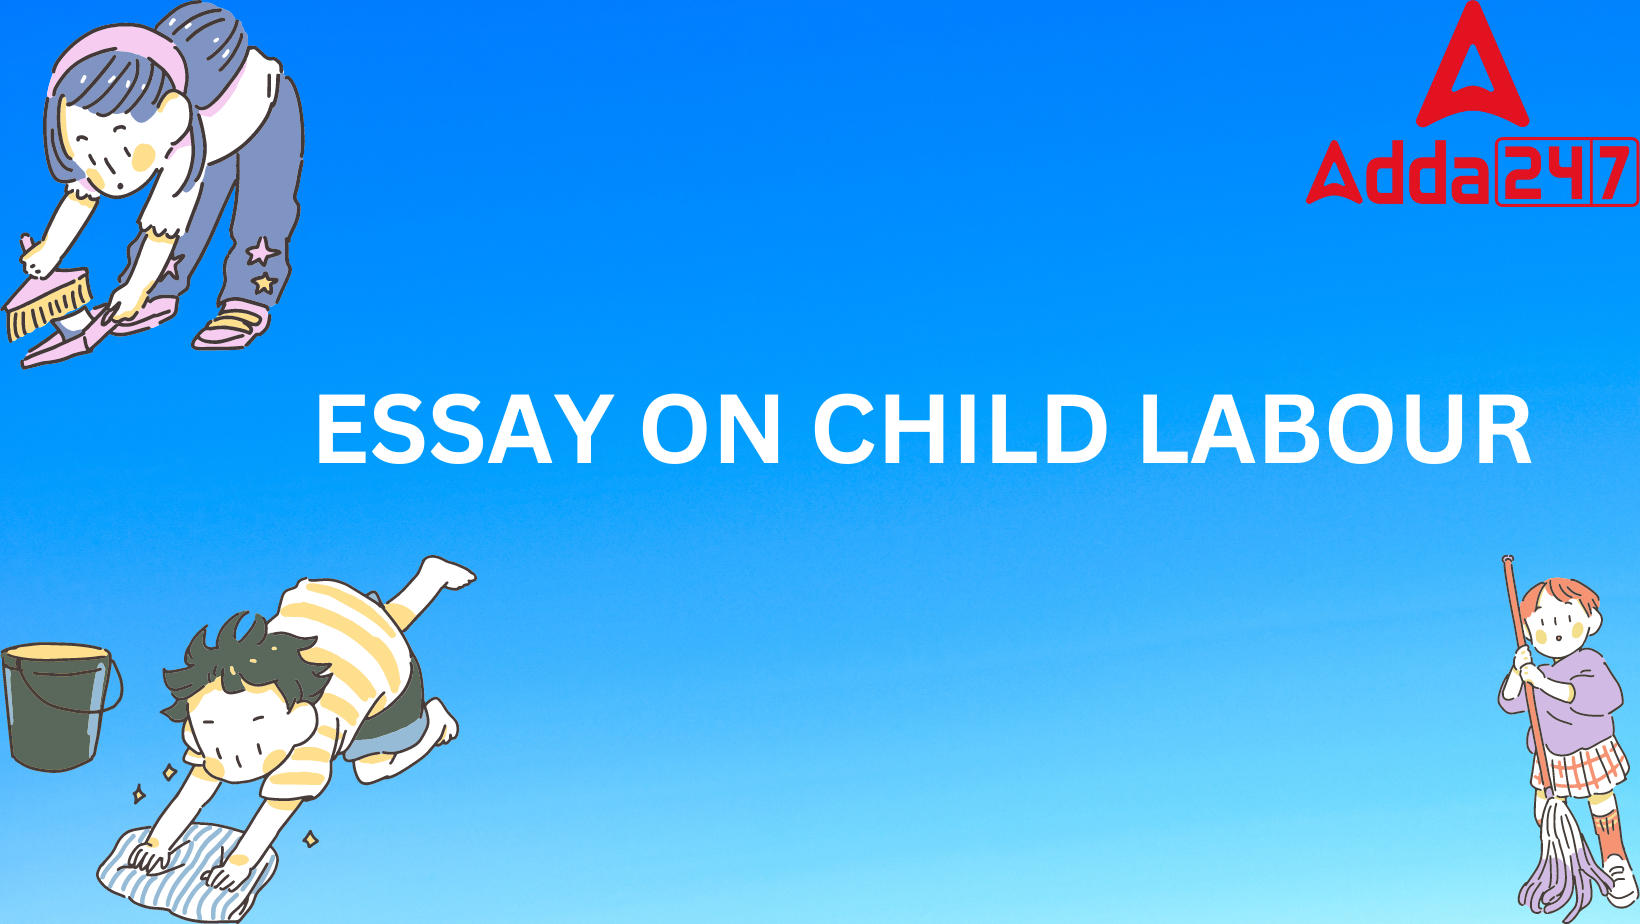 Child Labour Essay in English [150 Words]_20.1